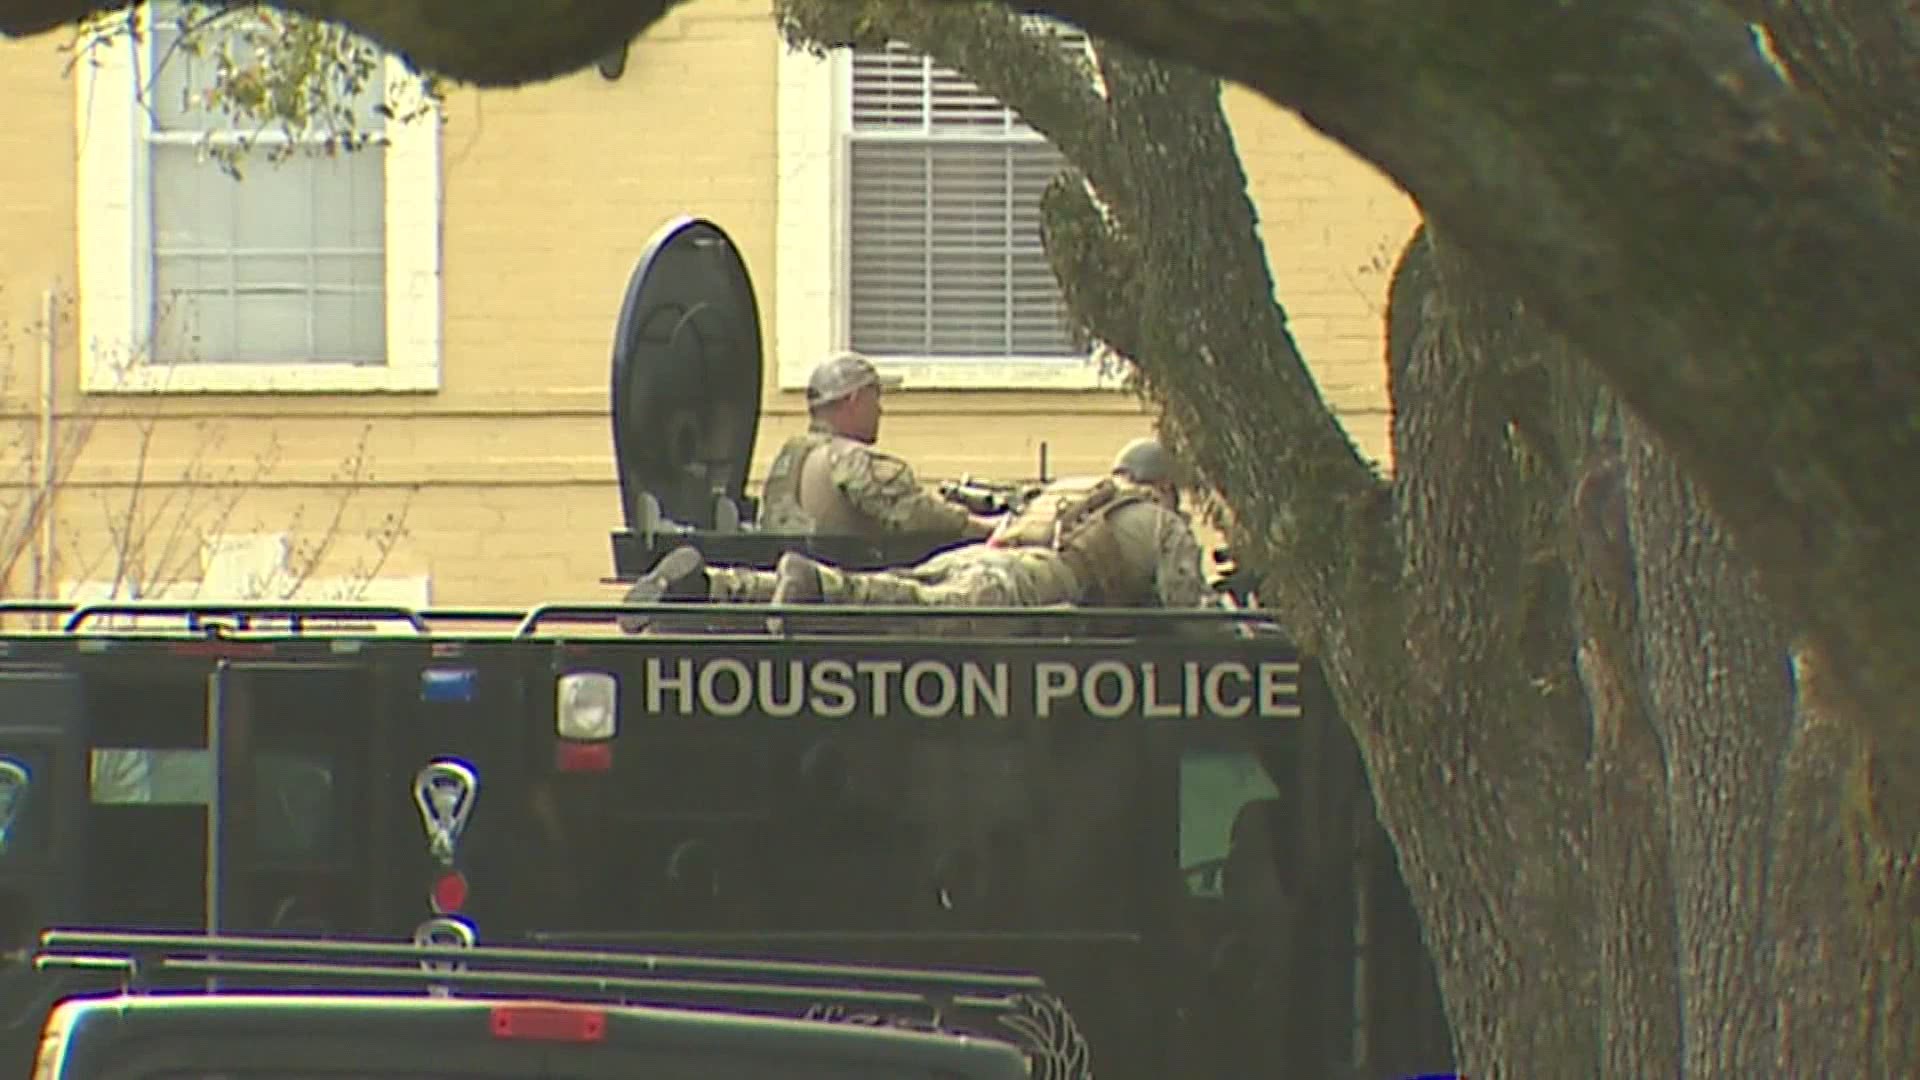 A seven-hour police standoff ended with two dead men, four escaped hostages and a suspect in custody Wednesday morning, Houston police said.